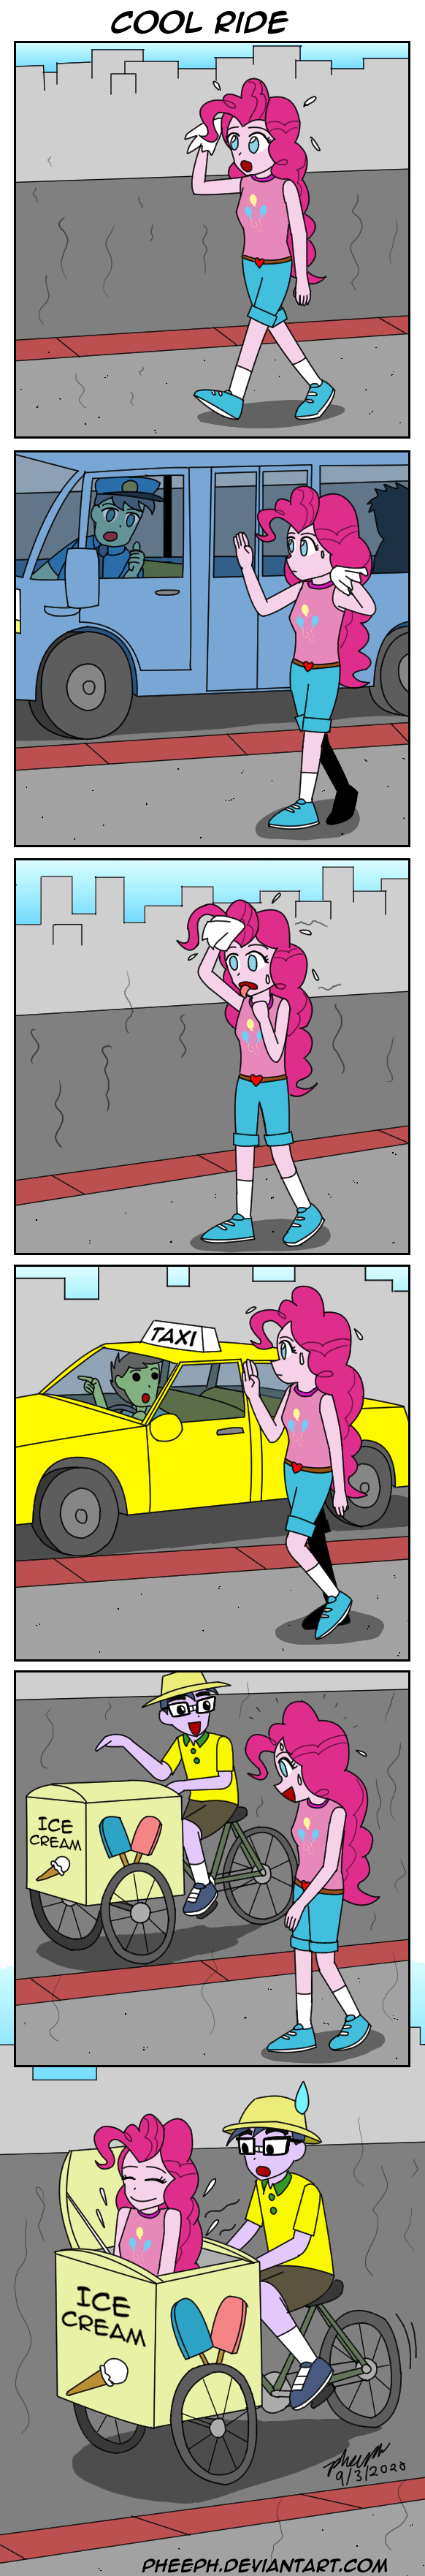 Page 76 - Cool Ride